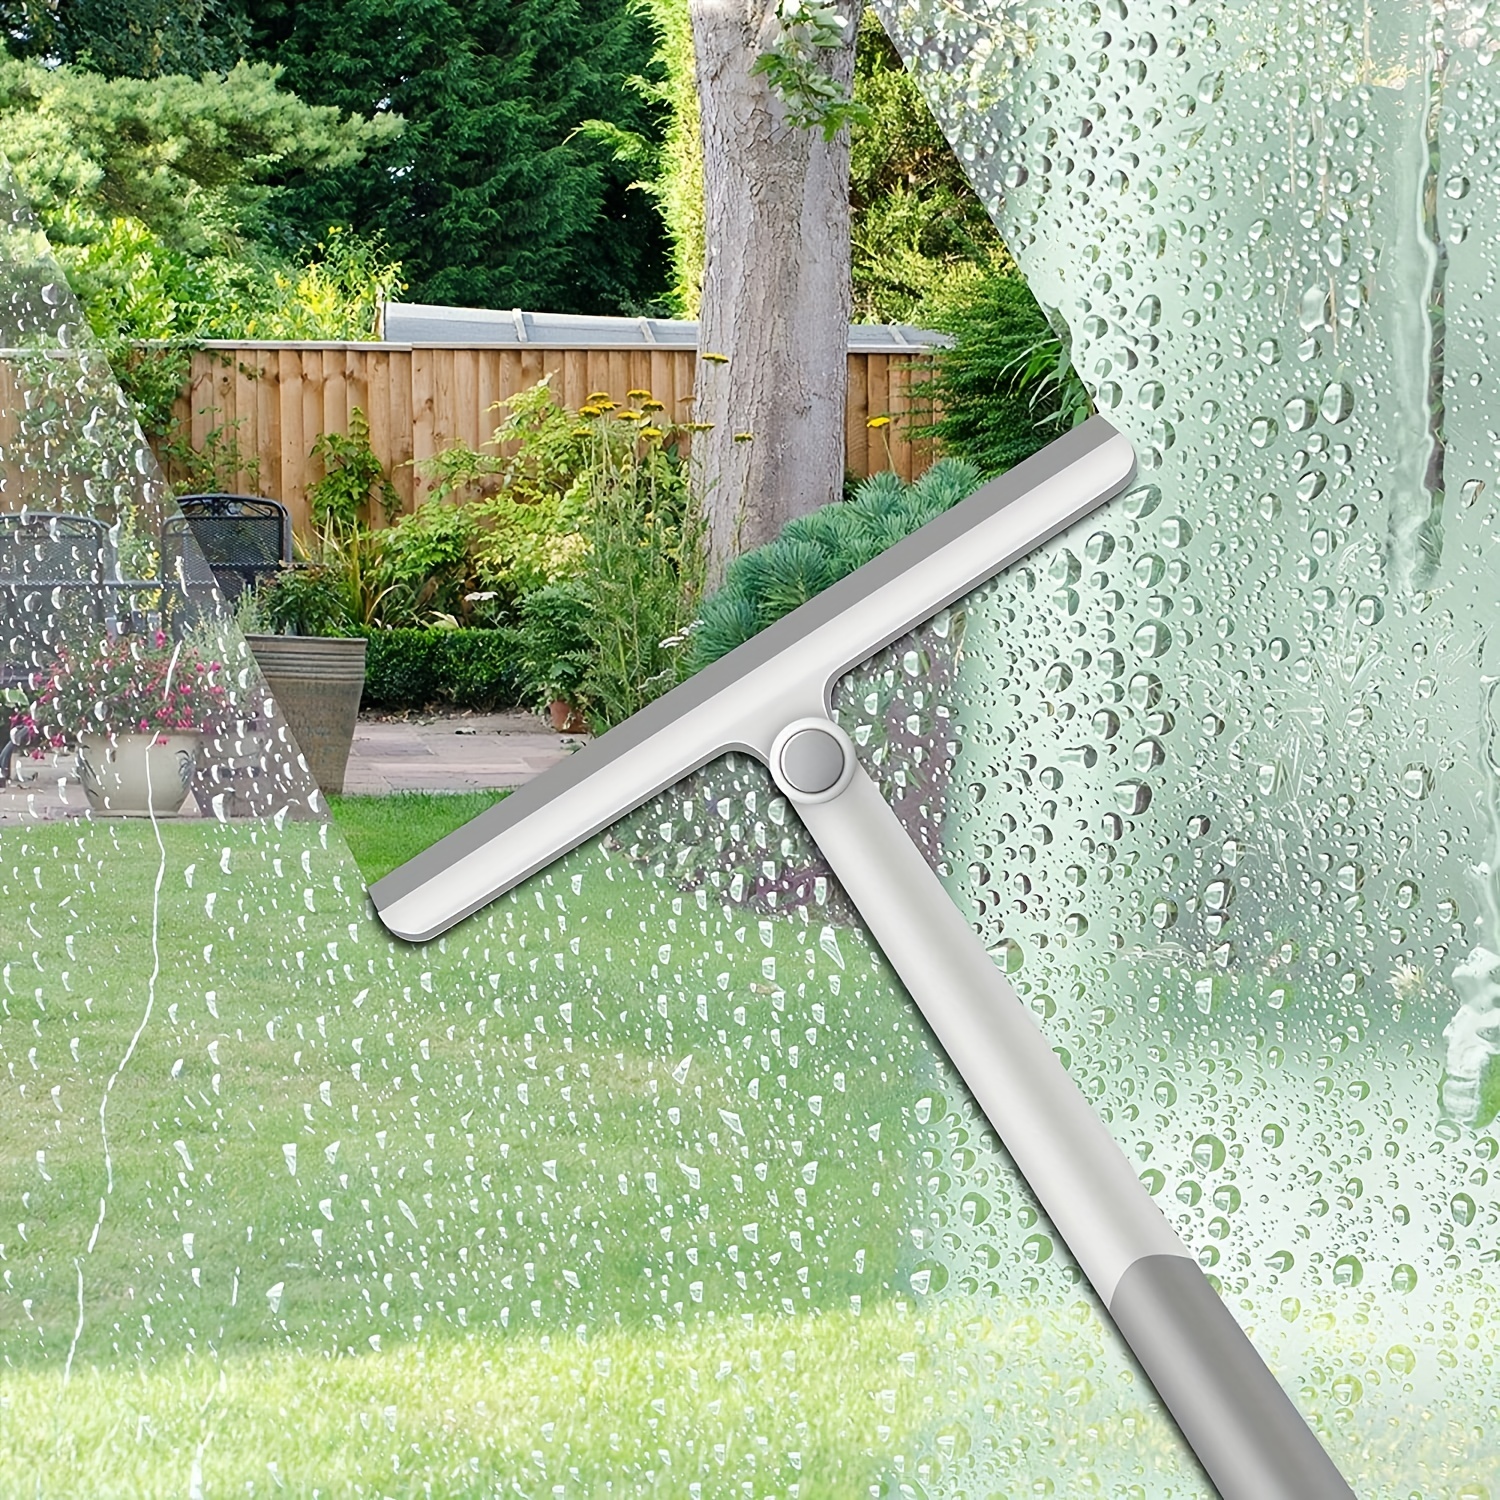 SetSail Shower Squeegee for Glass Doors, Small Squeegee for Shower